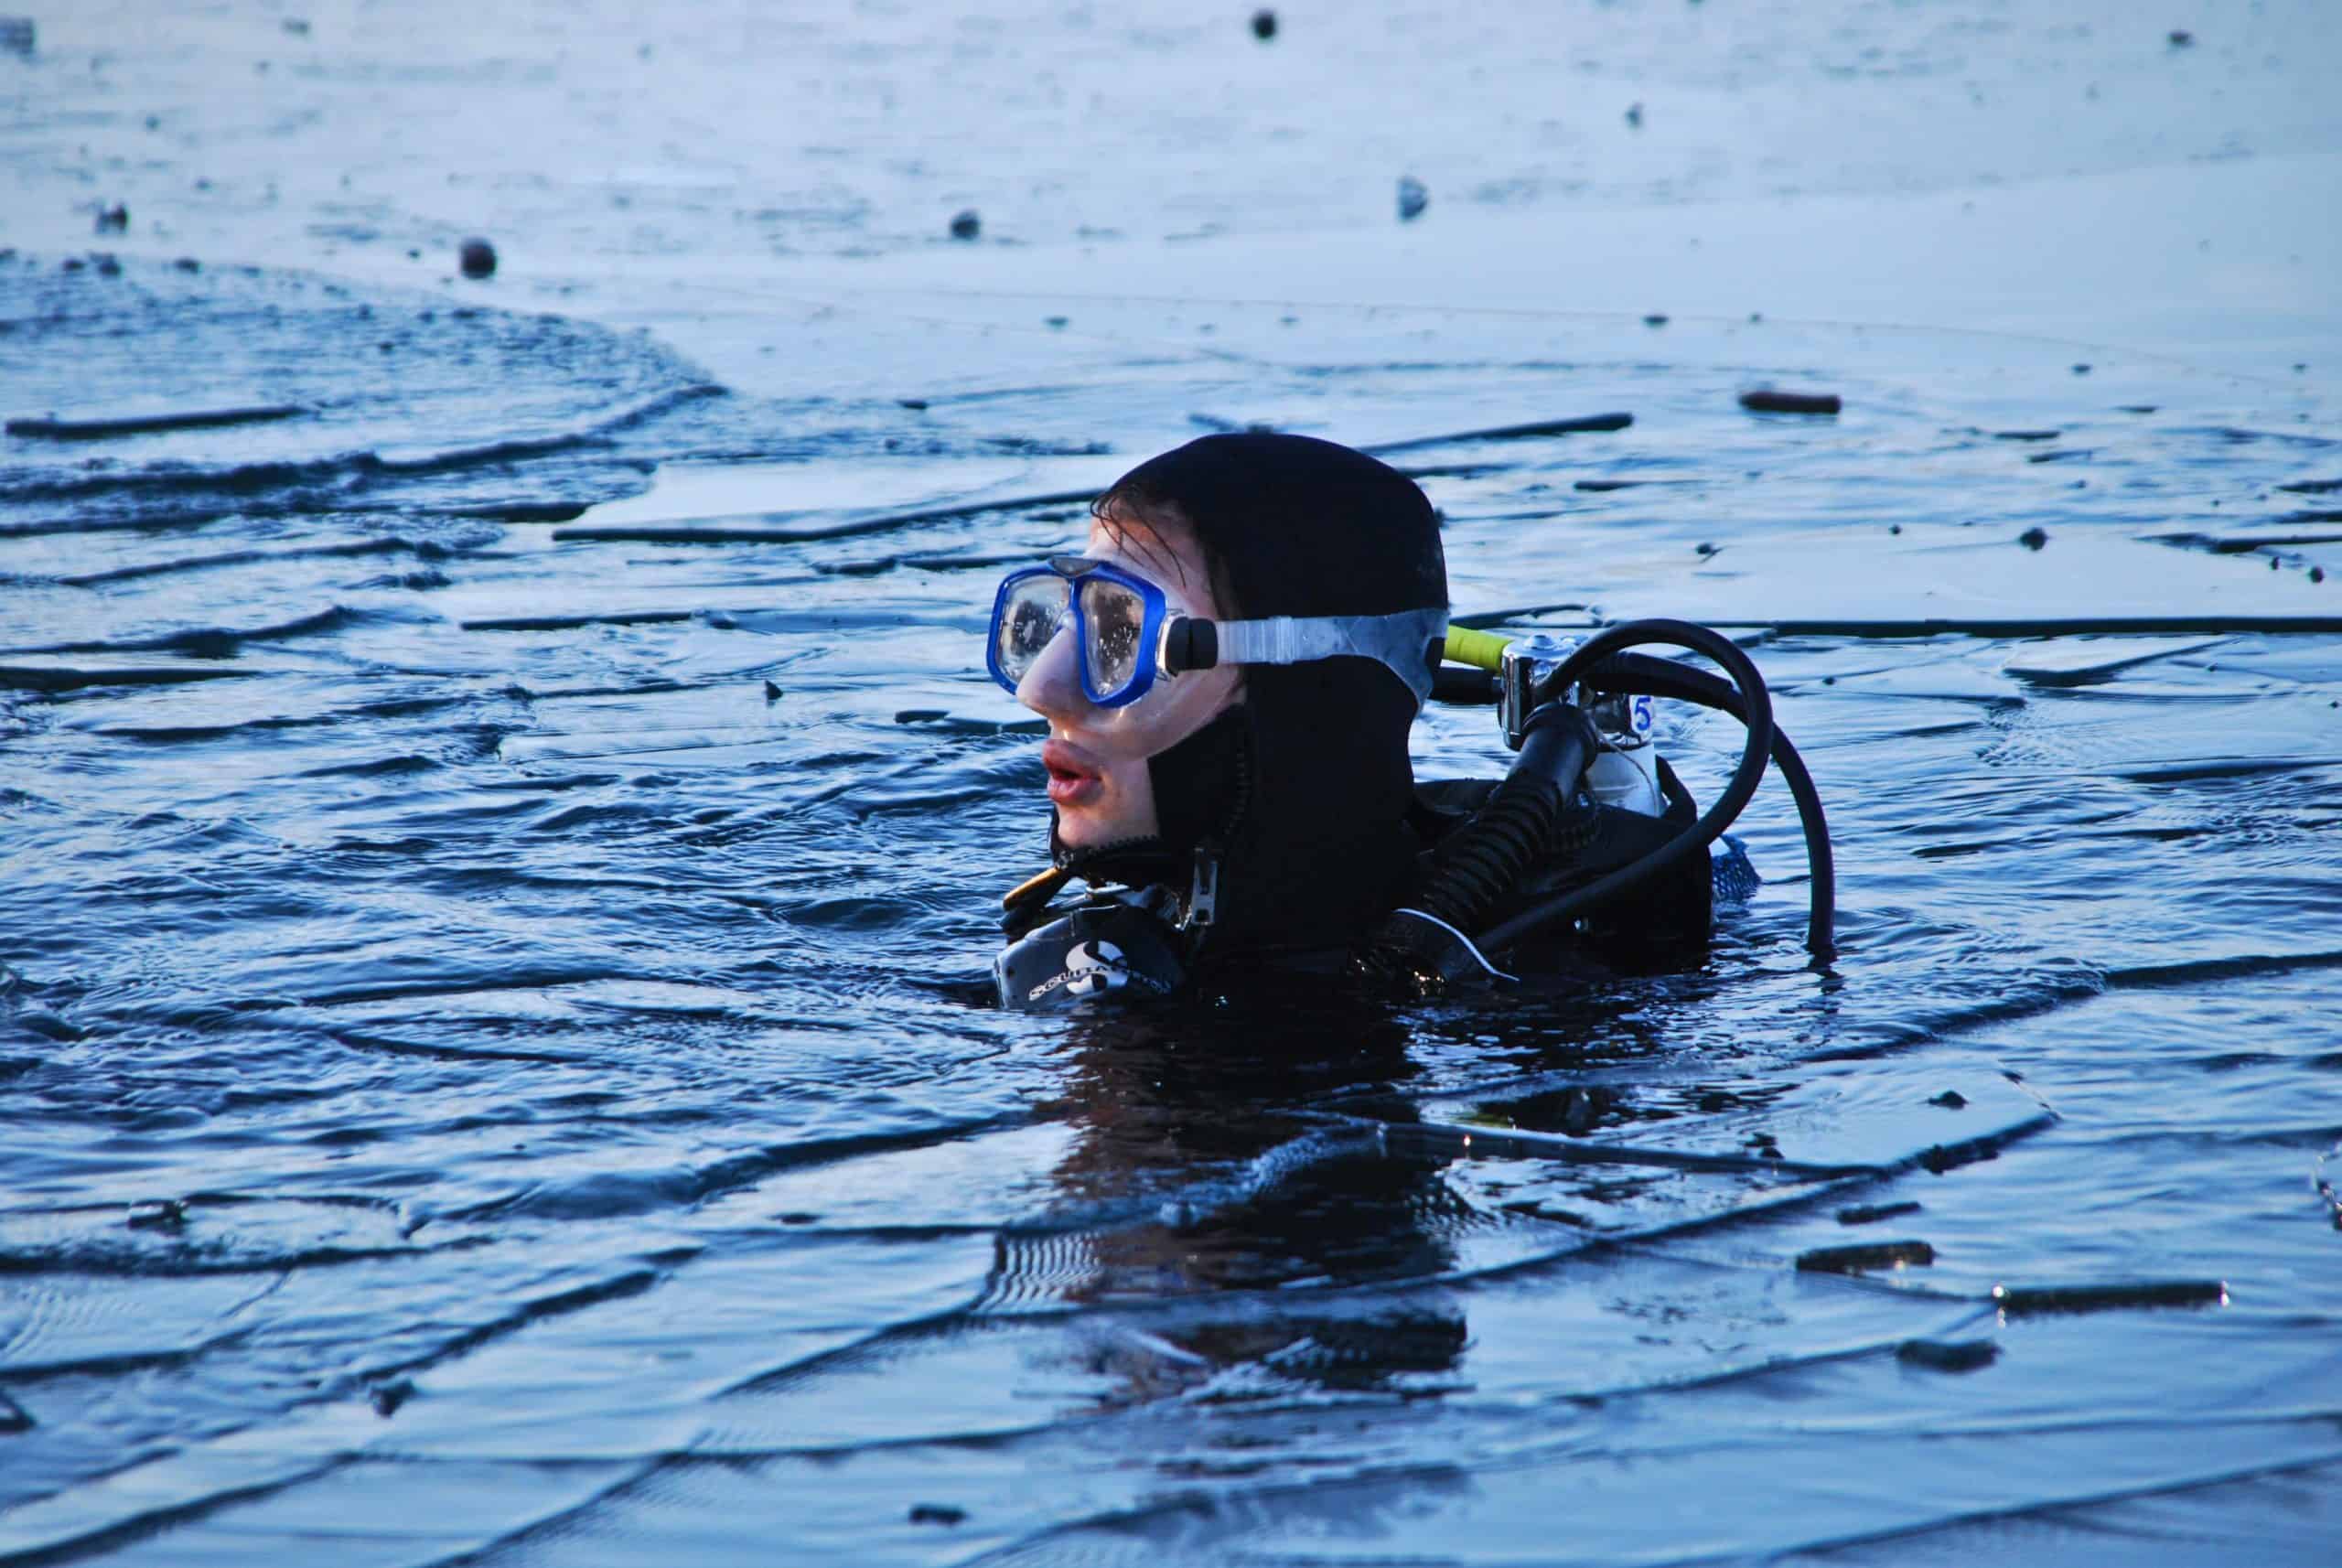 Ice diving – is it safe?